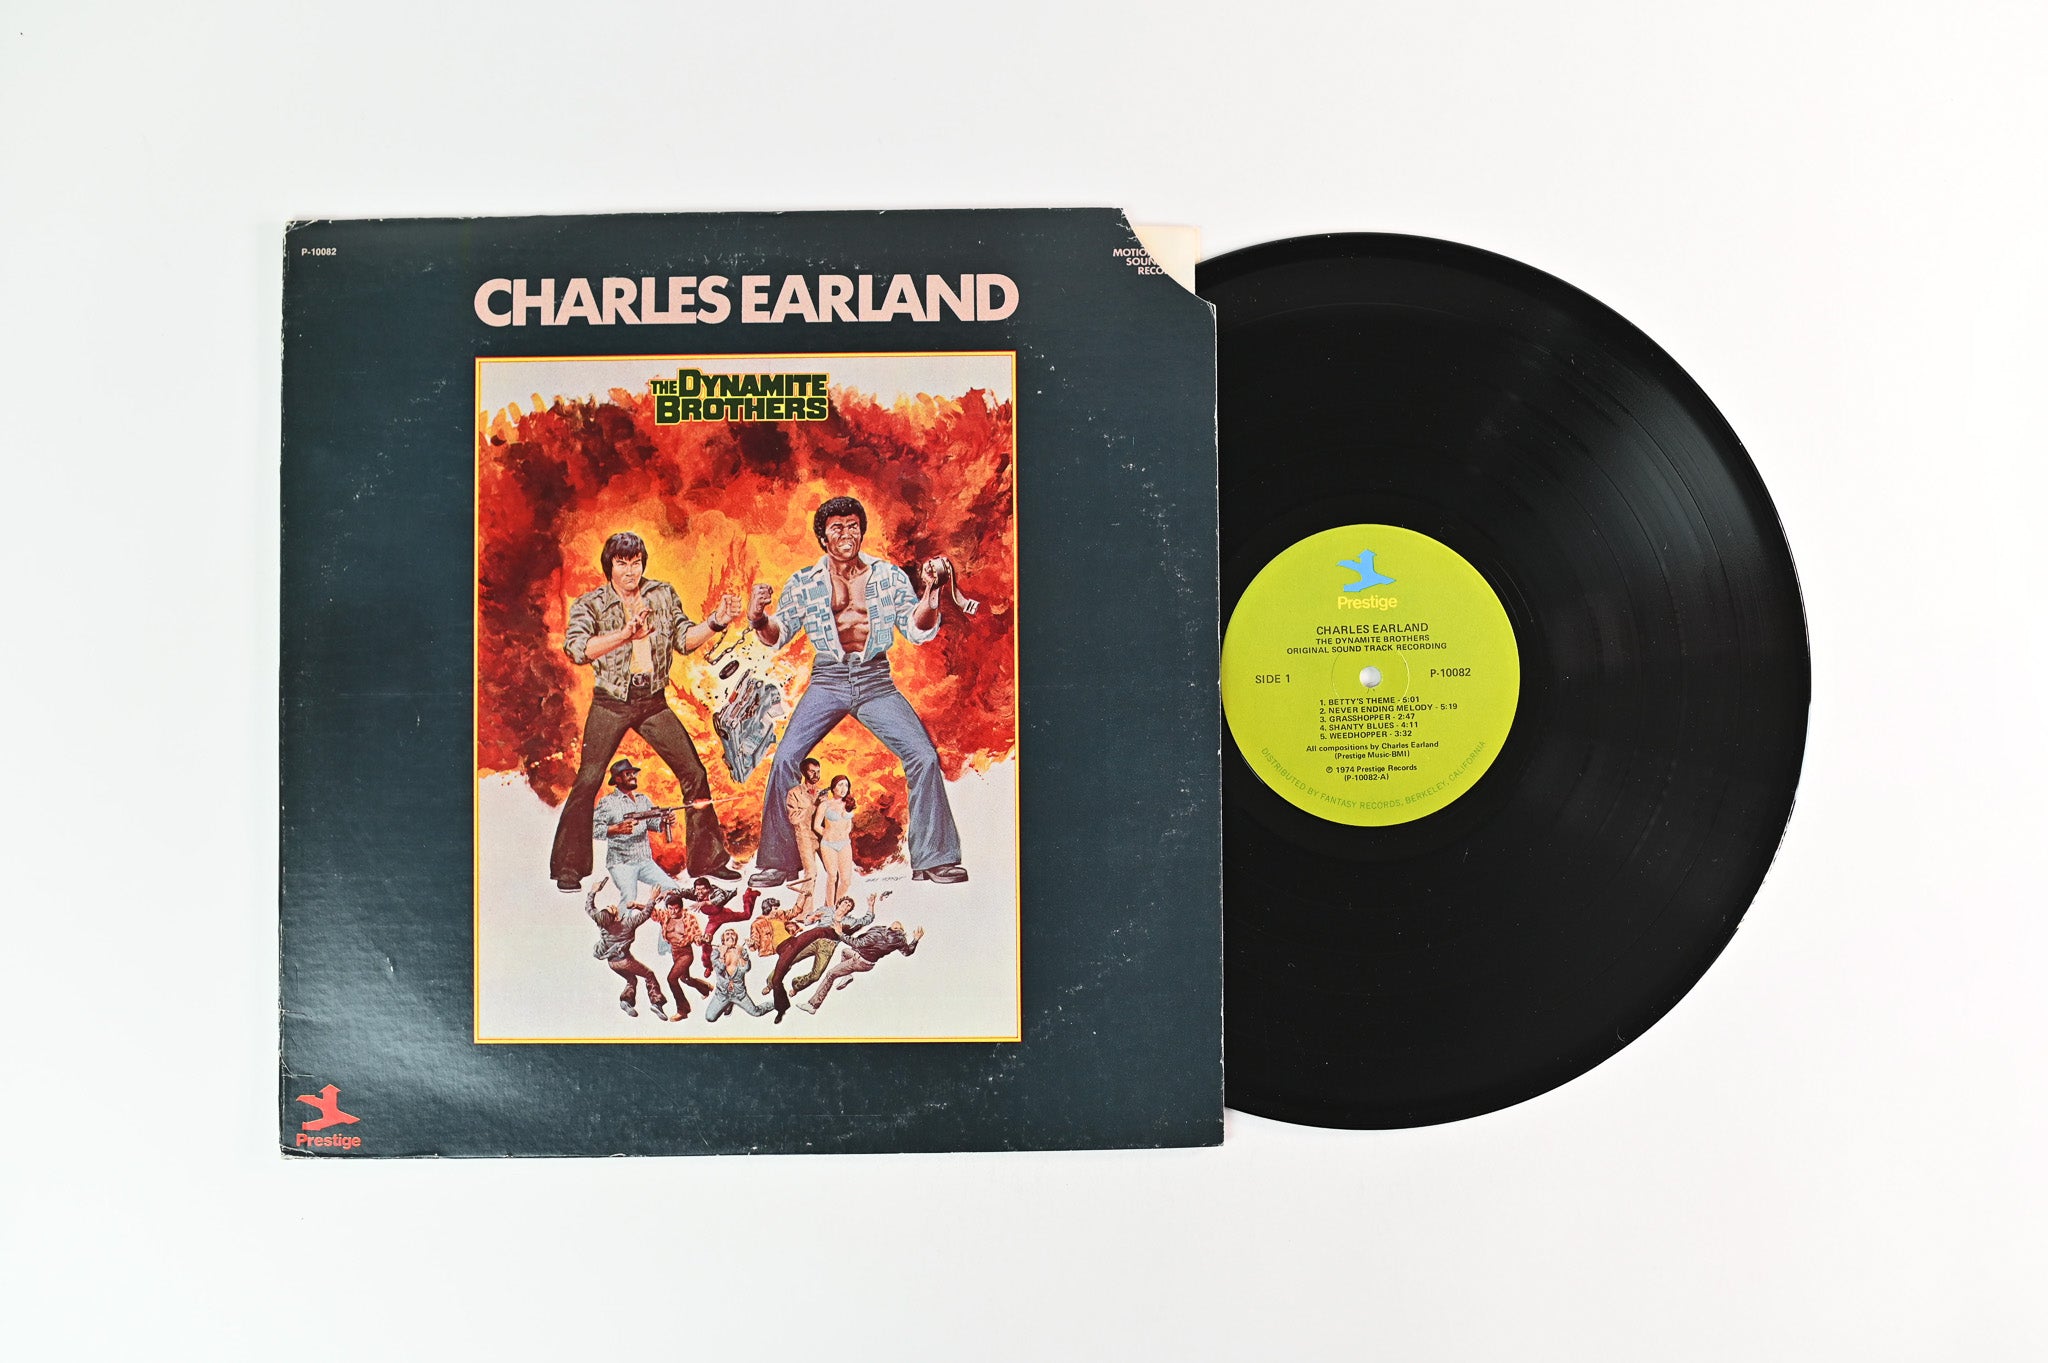 Charles Earland - The Dynamite Brothers (Original Soundtrack) on Prestige